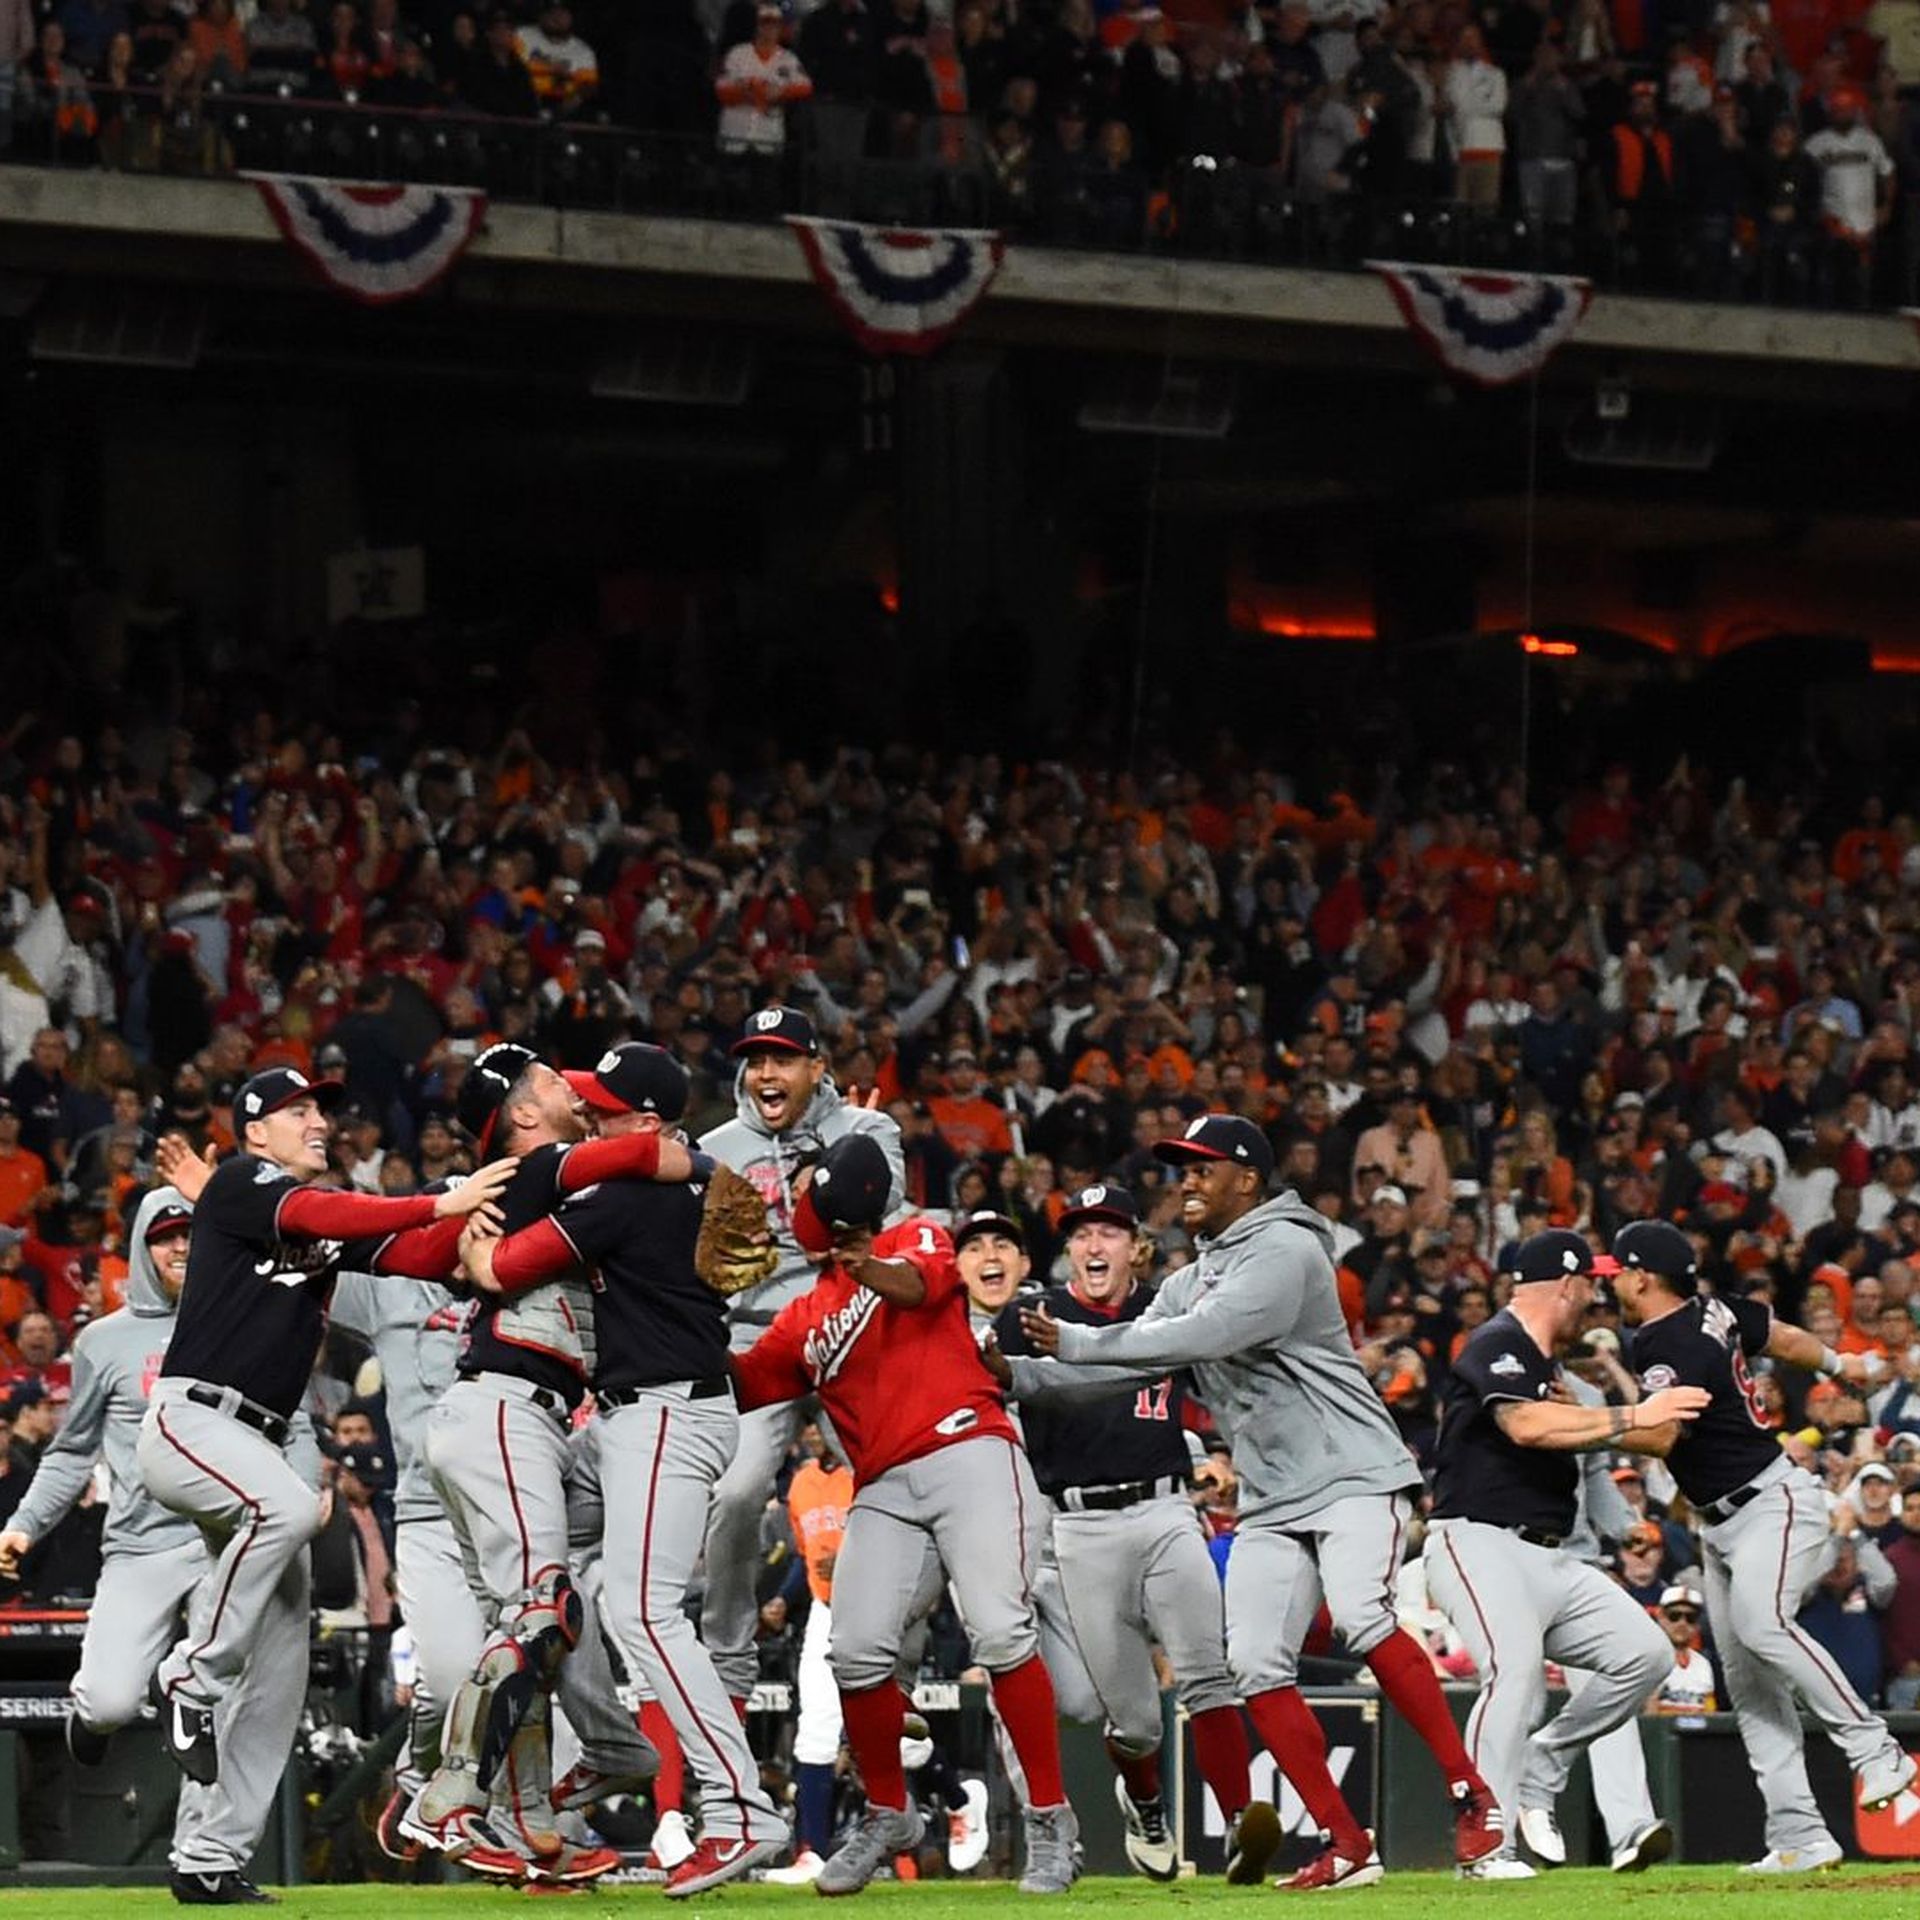 MLB Network - The Washington Nationals are your 2019 World Series